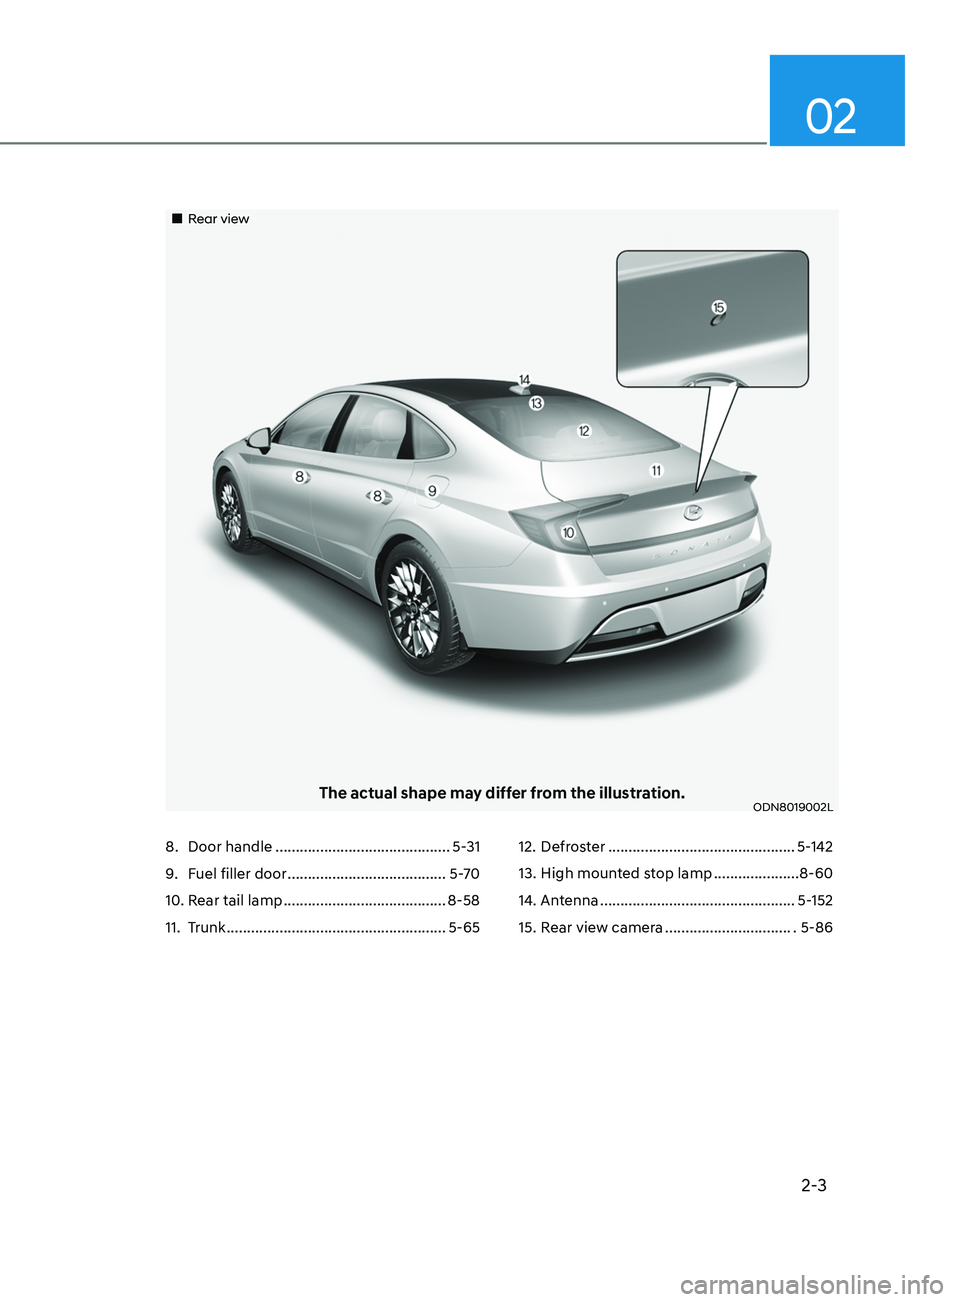 HYUNDAI SONATA LIMITED 2020 User Guide 2-3
02
„„Rear view
The actual shape may differ from the illustration.ODN8019002L
8. Door handle  ........................................... 5-31
9.
 F
 uel filler door   ...................